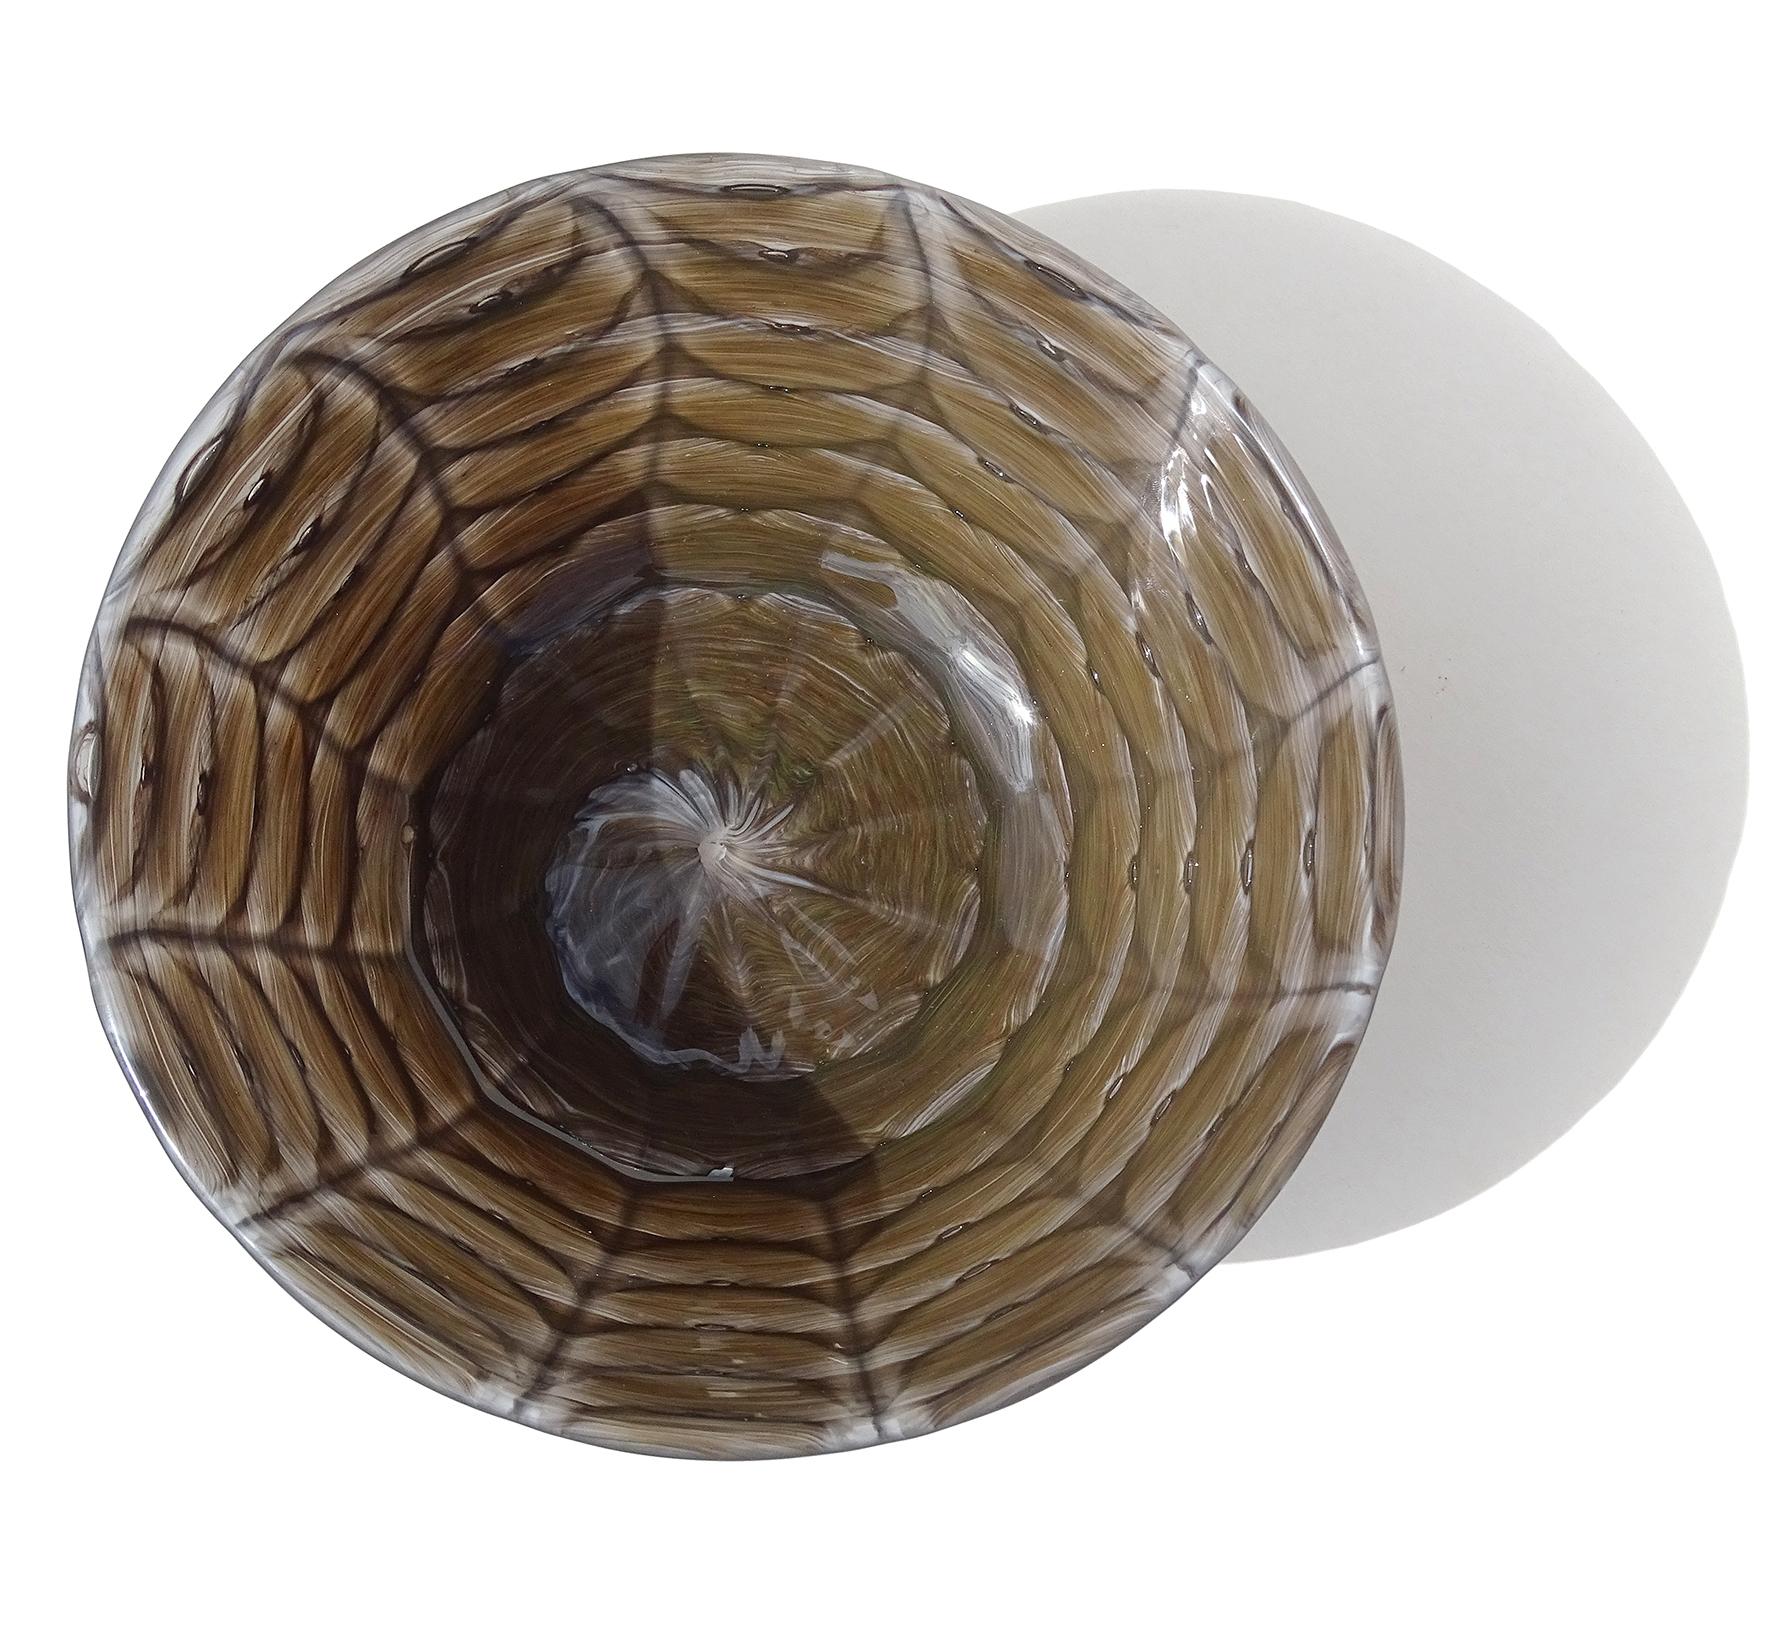 Hand-Crafted Barovier Toso Murano Neolitico 1954 Pulled Feather Design Italian Art Glass Bowl